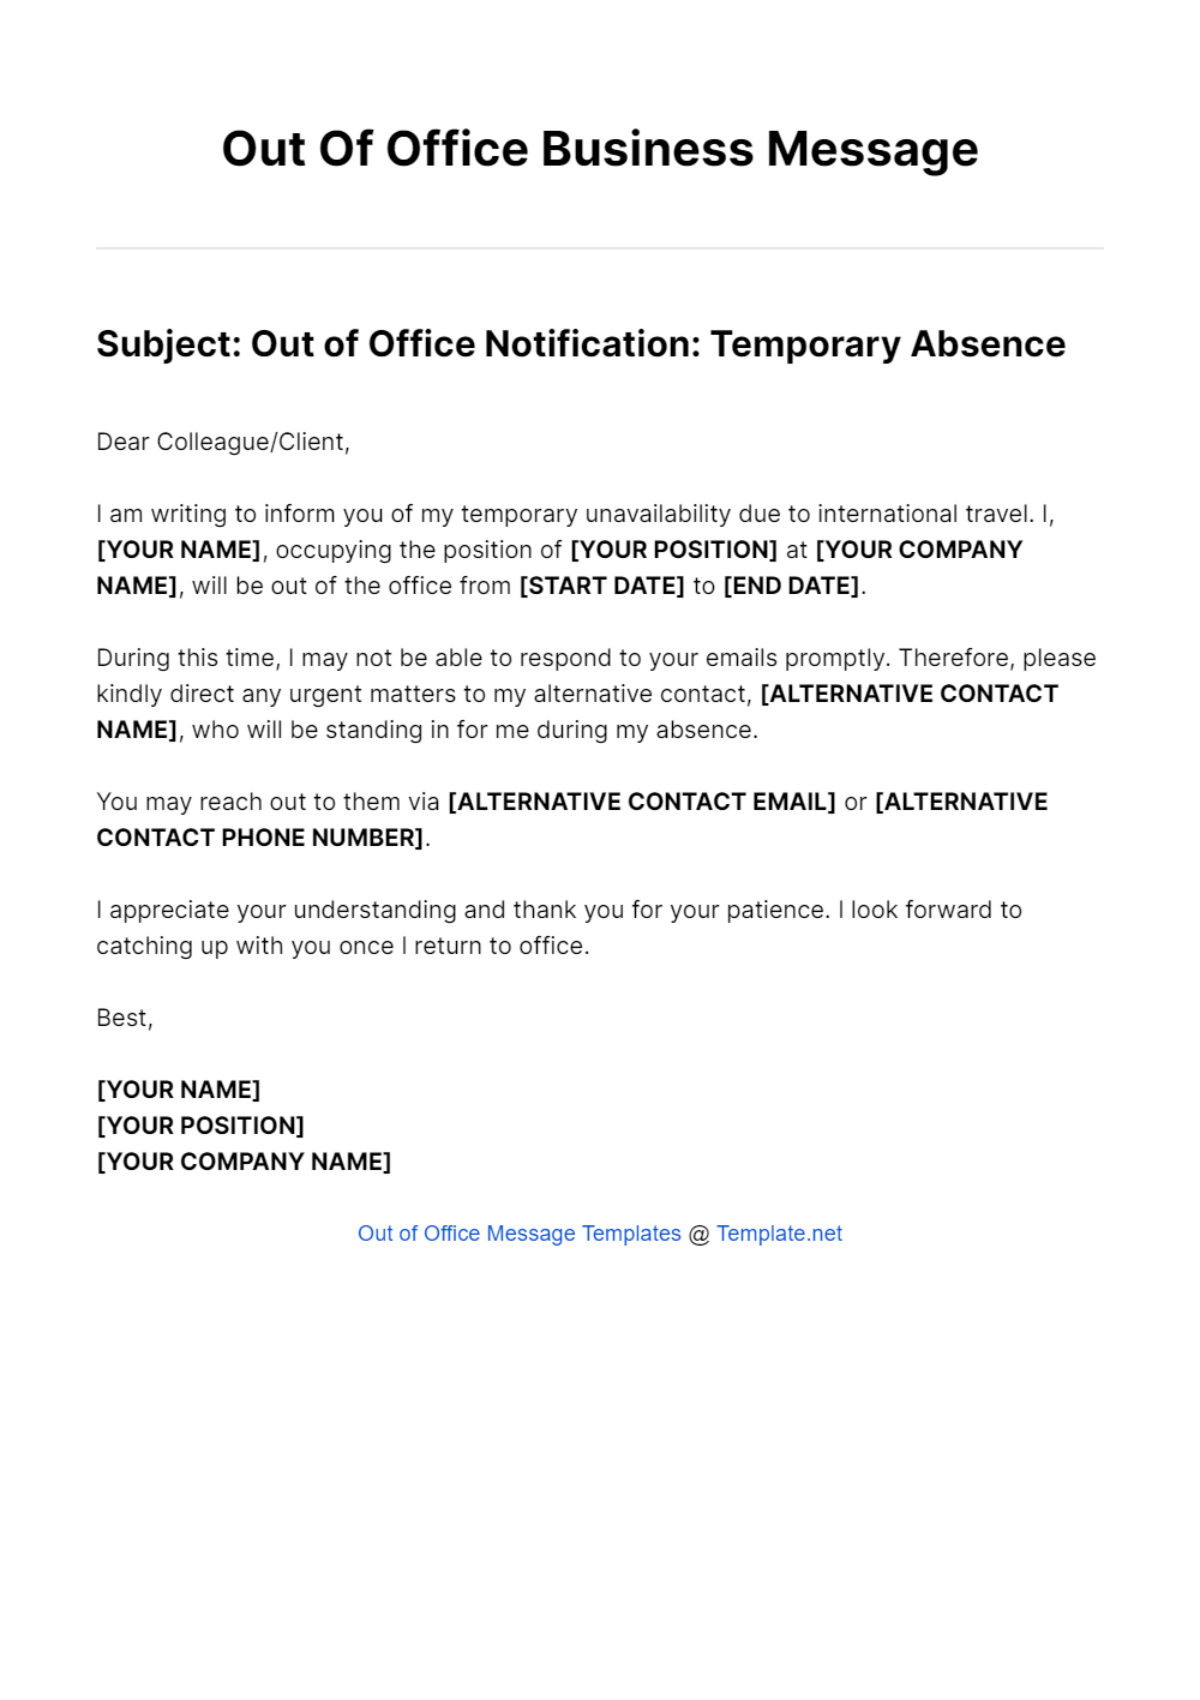 Out Of Office Business Message Template